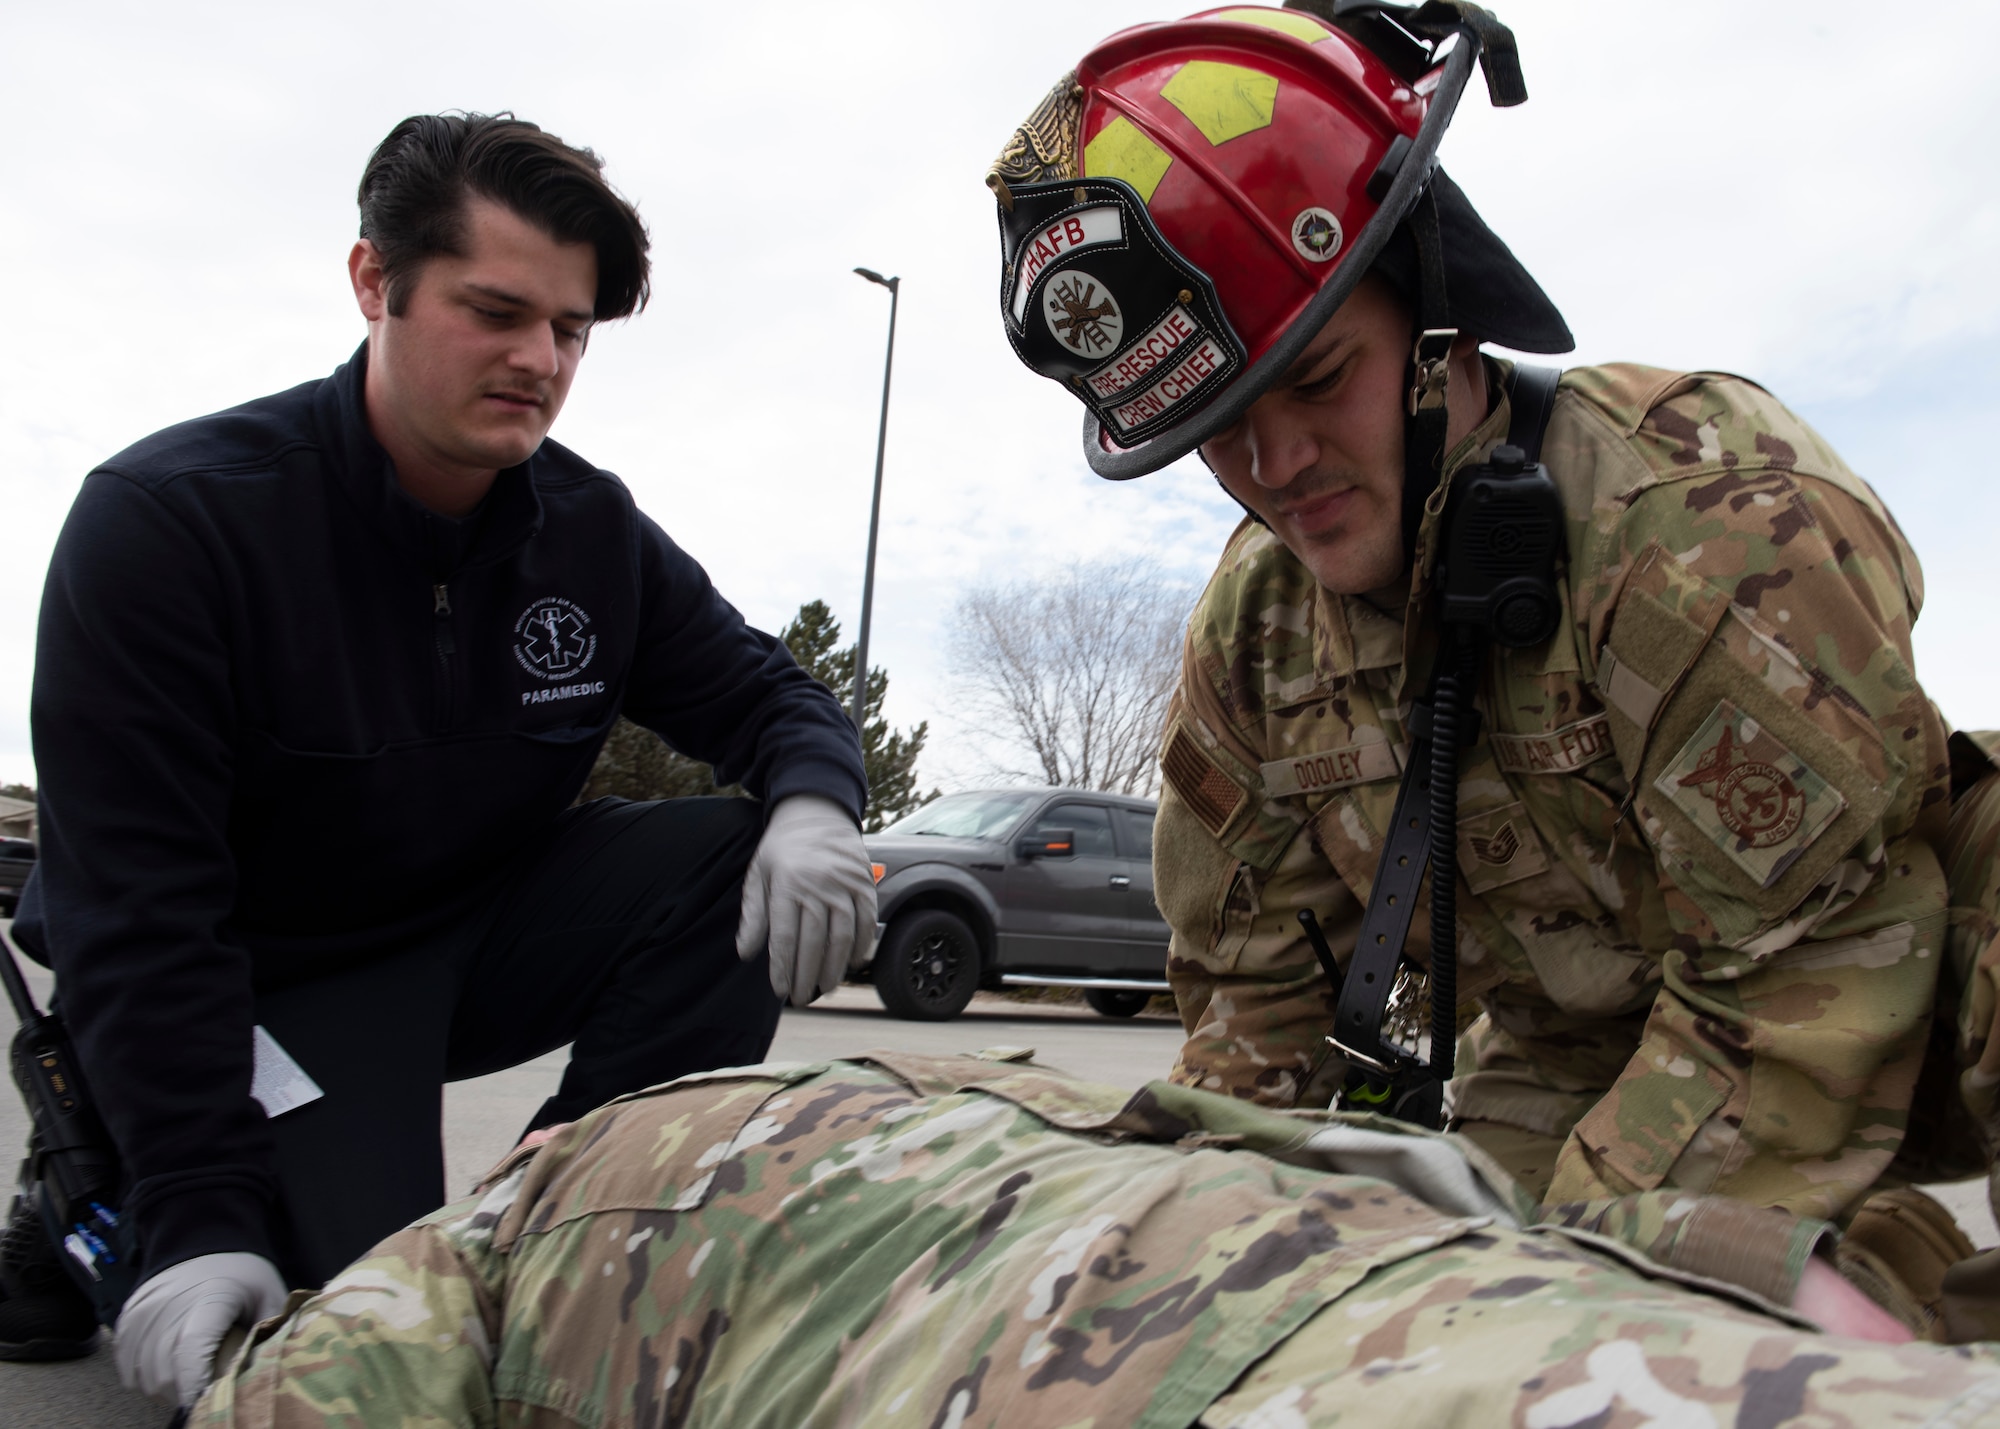 Two Airmen inspect the simulated, injured body of another Airman.